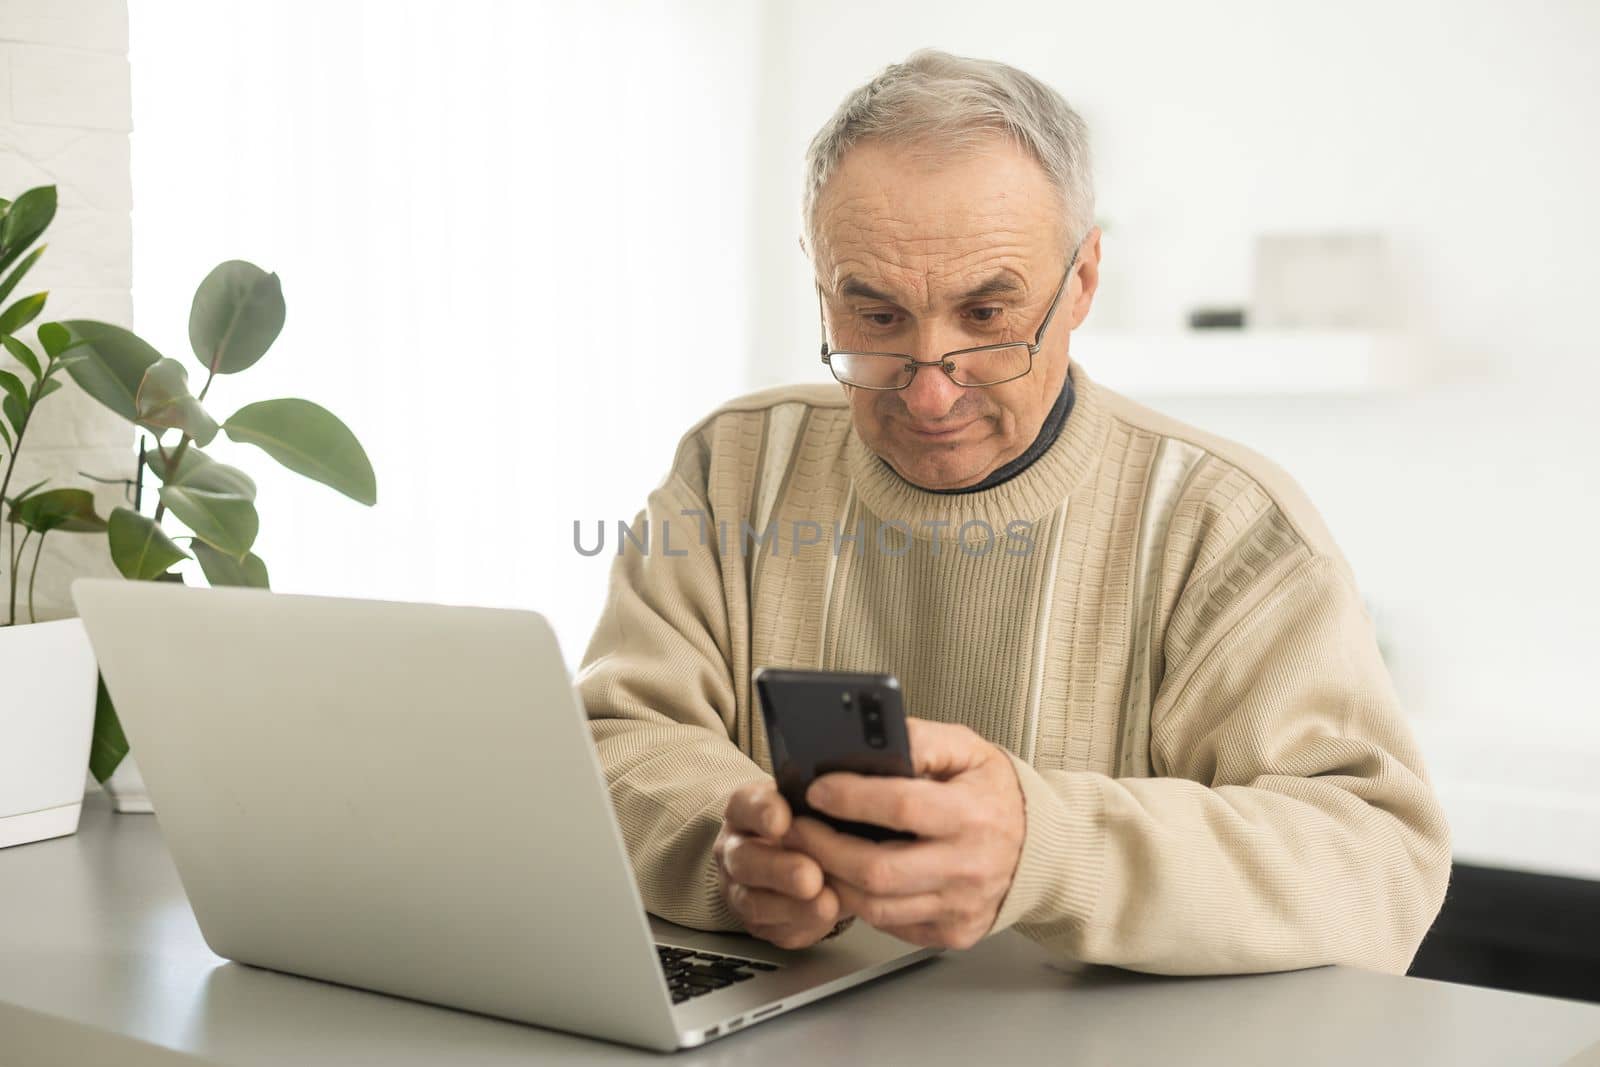 Busy smart mature professional man using laptop sitting. Middle aged older adult businessman, senior entrepreneur of mid age remote working or learning online typing on computer